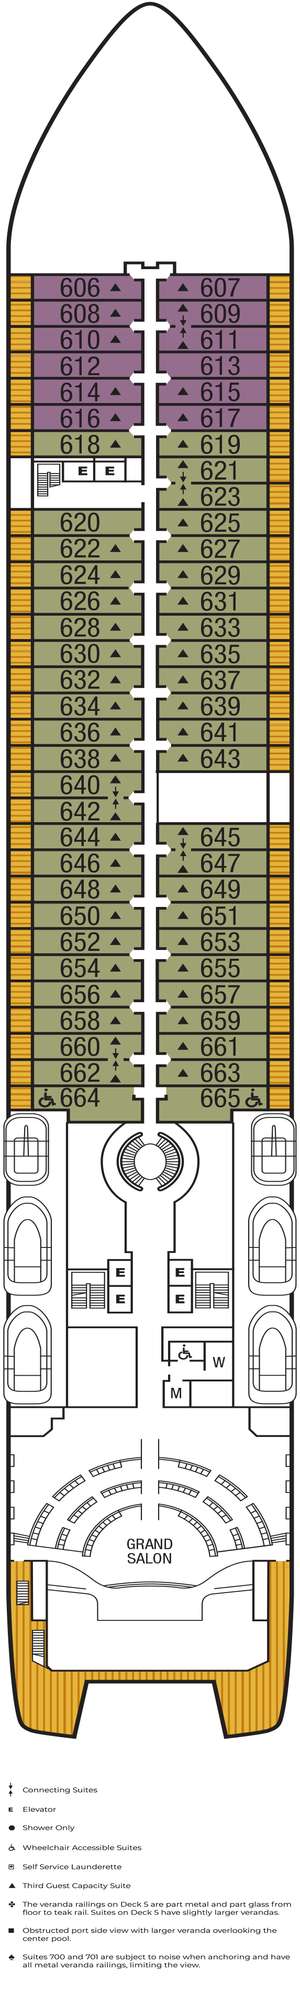 Deck plan for Seabourn Ovation